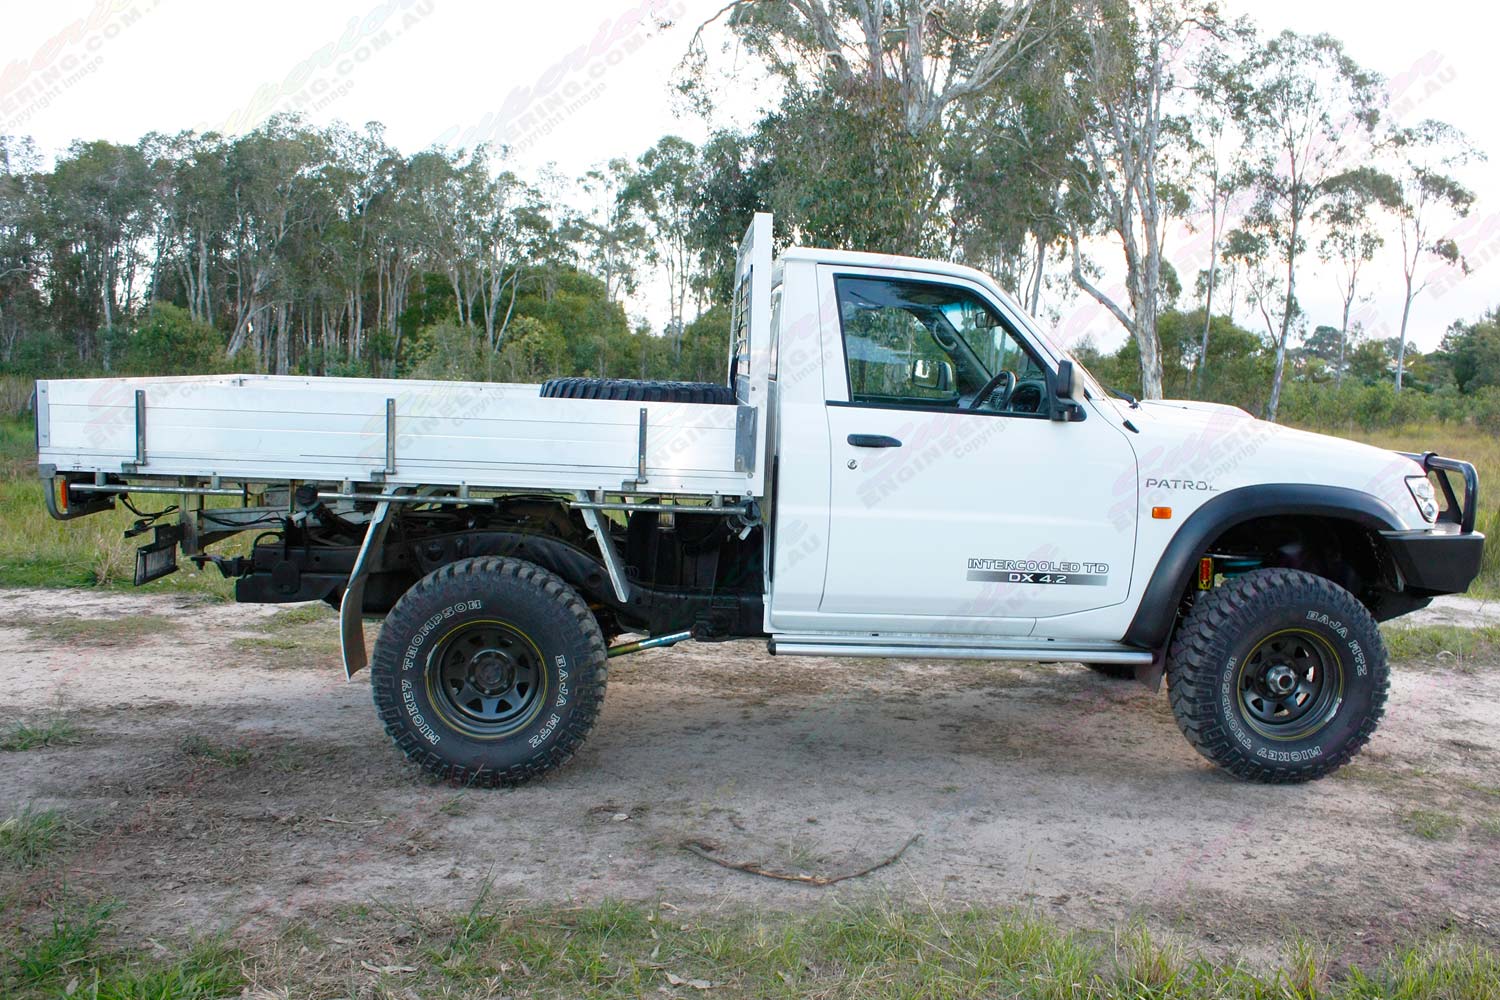 Right side view of a white GU Nissan Patrol single cab ute after being fitted with a 4 inch Superior Drop Box lift kit